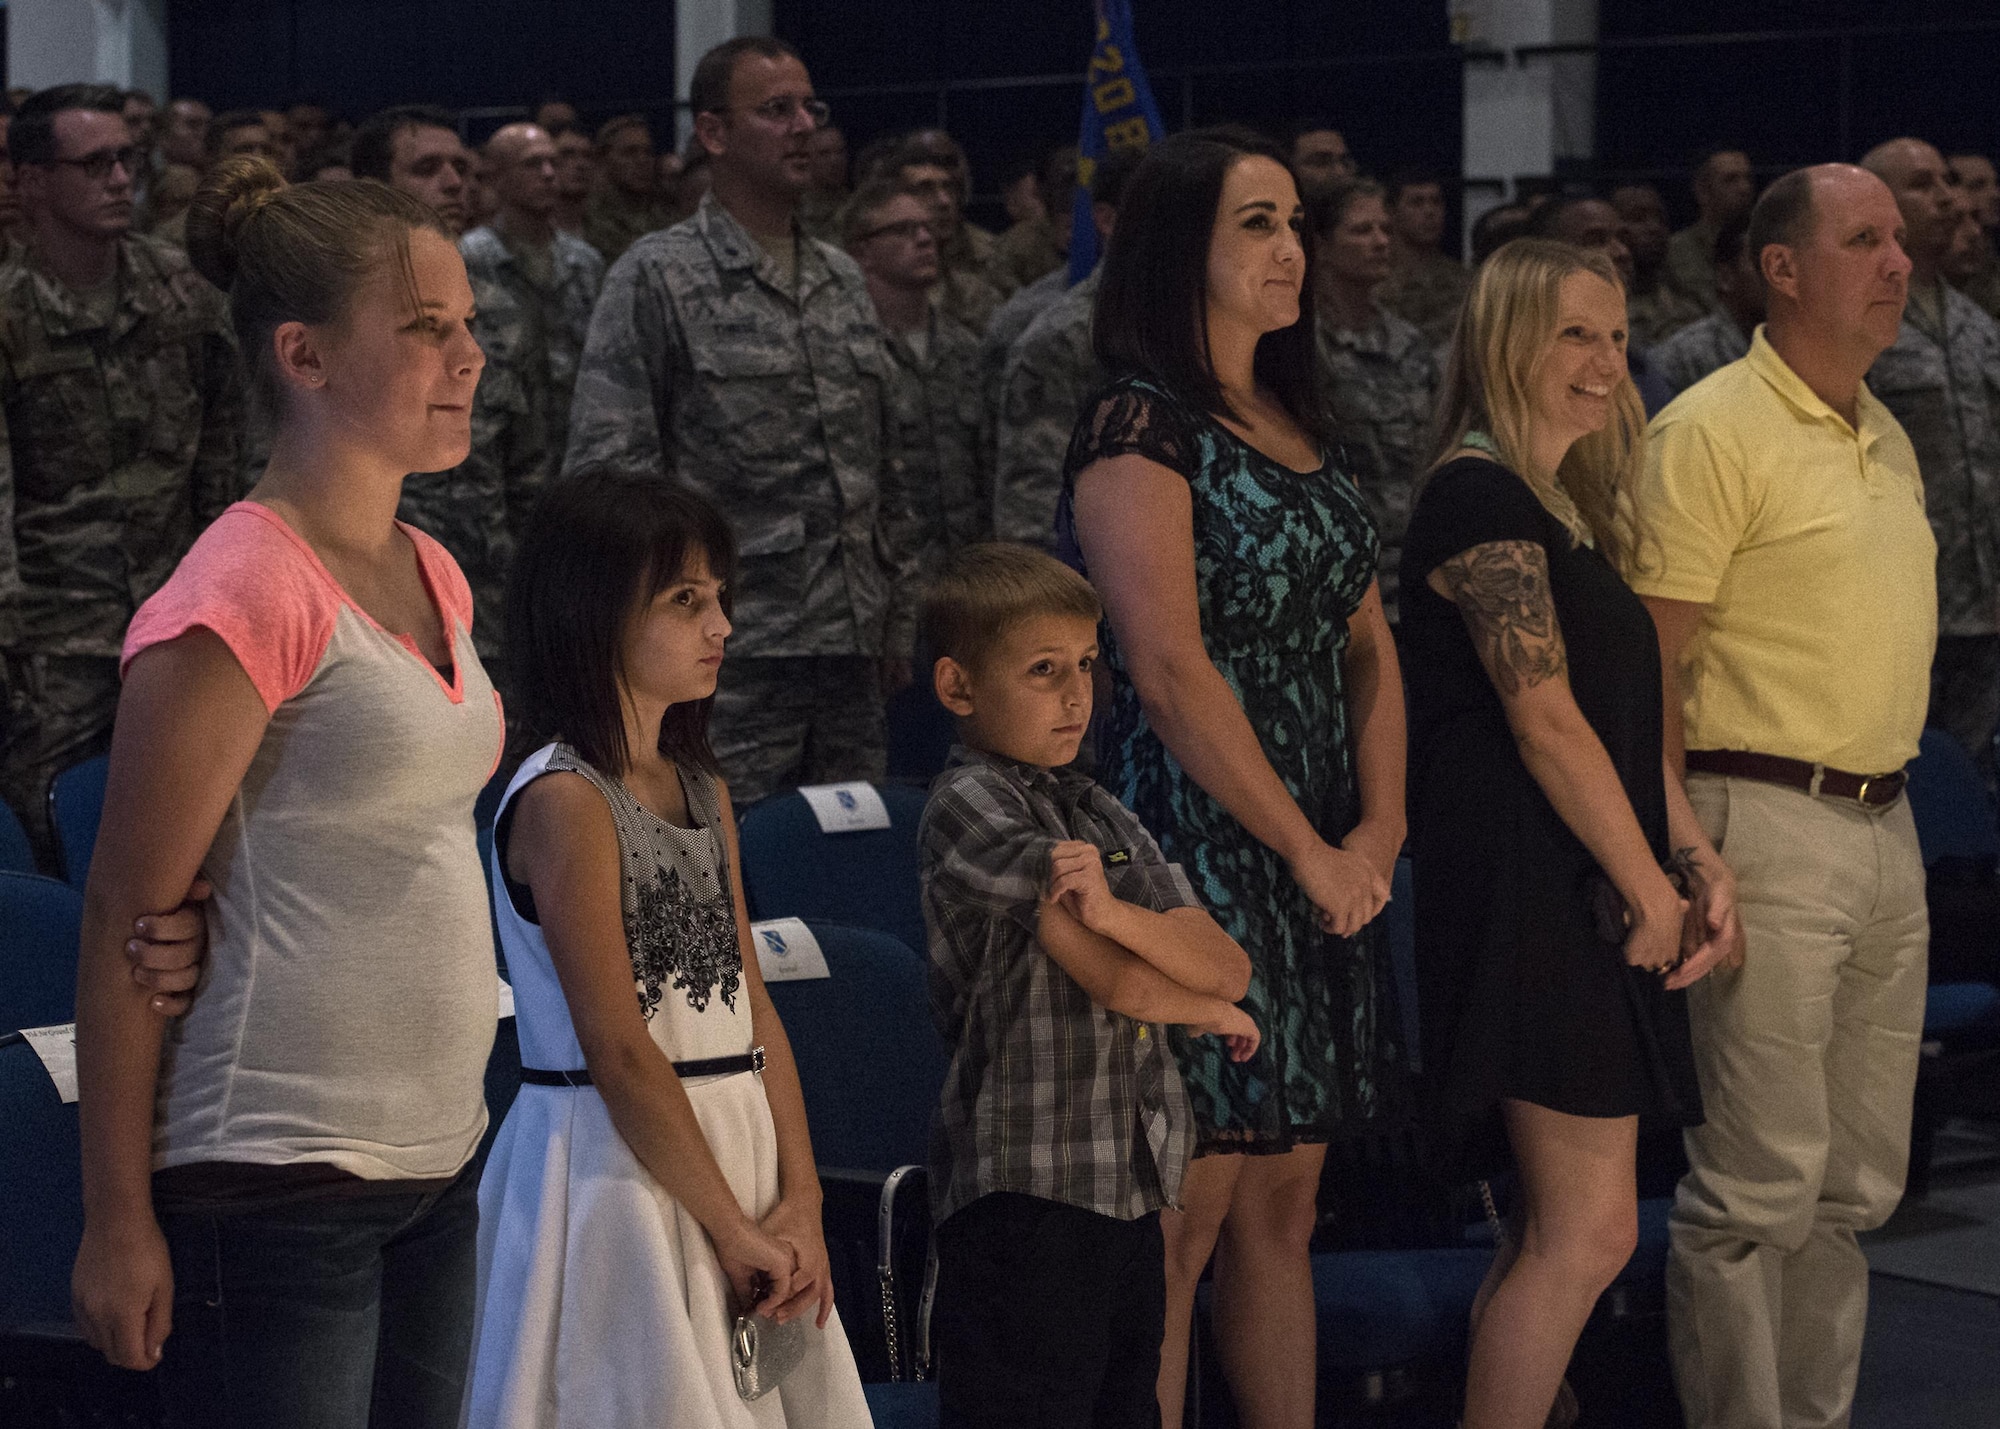 Family and friends of U.S. Air Force Master Sgt. Aaron Frederick, 93d Air Ground Operations Wing command chief executive assistant and Staff Sgt. Bradley Mock 824 Base Defense Squadron superintendent of supply, rise for the entrance of the official party, July 8, 2016, at Moody Air Force Base, Ga. The 820th Base Defense Group awarded Frederick and Mock each a Bronze Star with Valor, Air Force Combat Action Medal and Purple Heart for their actions during an attack Dec. 21, 2015, in Southwest Asia. (U.S. Air Force photo by Airman 1st Class Janiqua P. Robinson/Released)